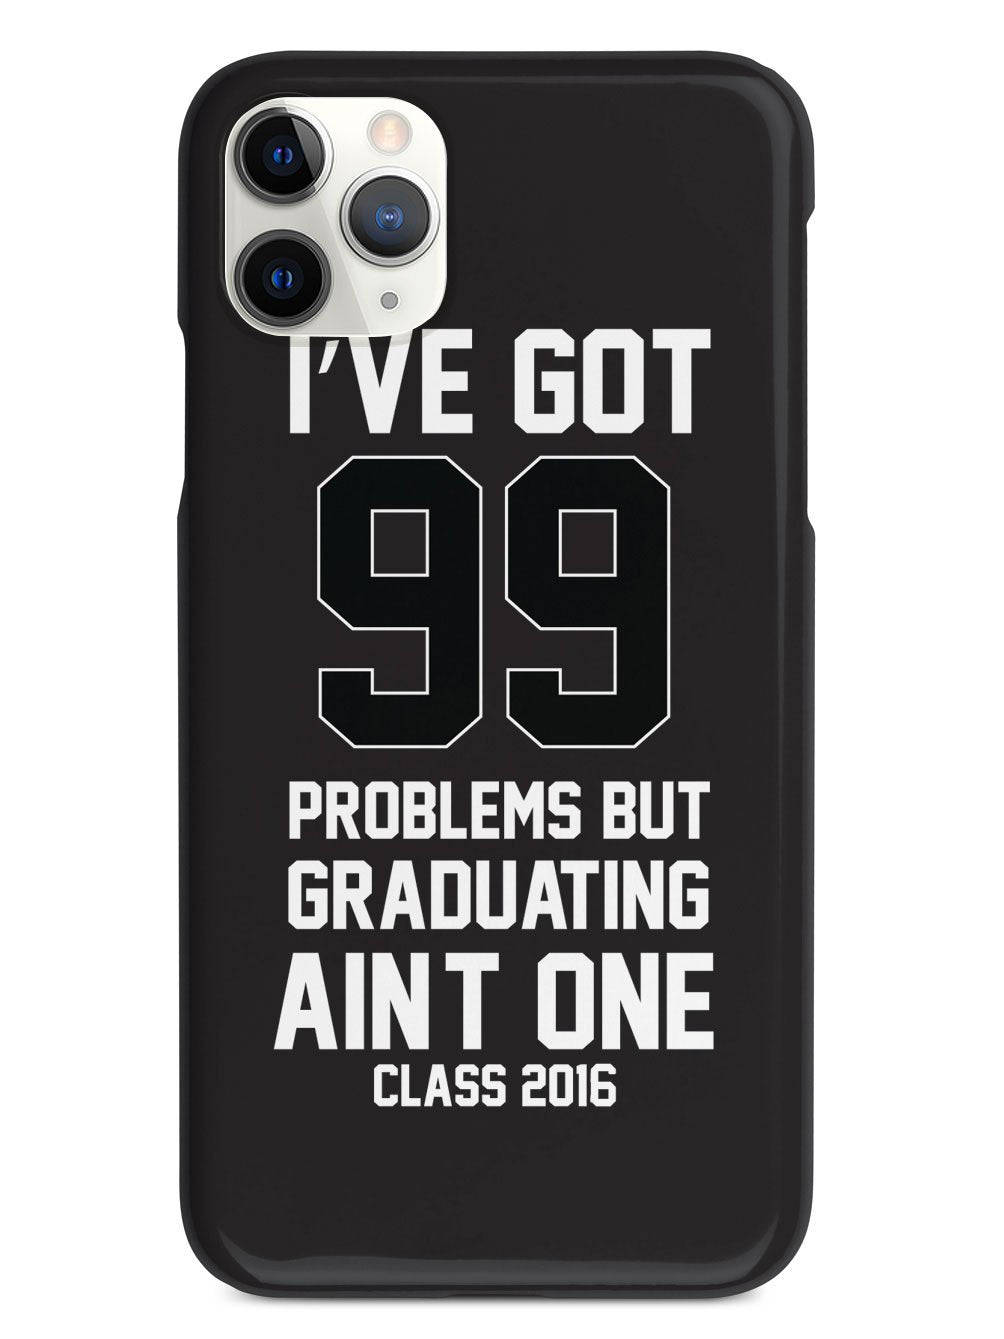 99 Problems - Graduating Ain't One Case